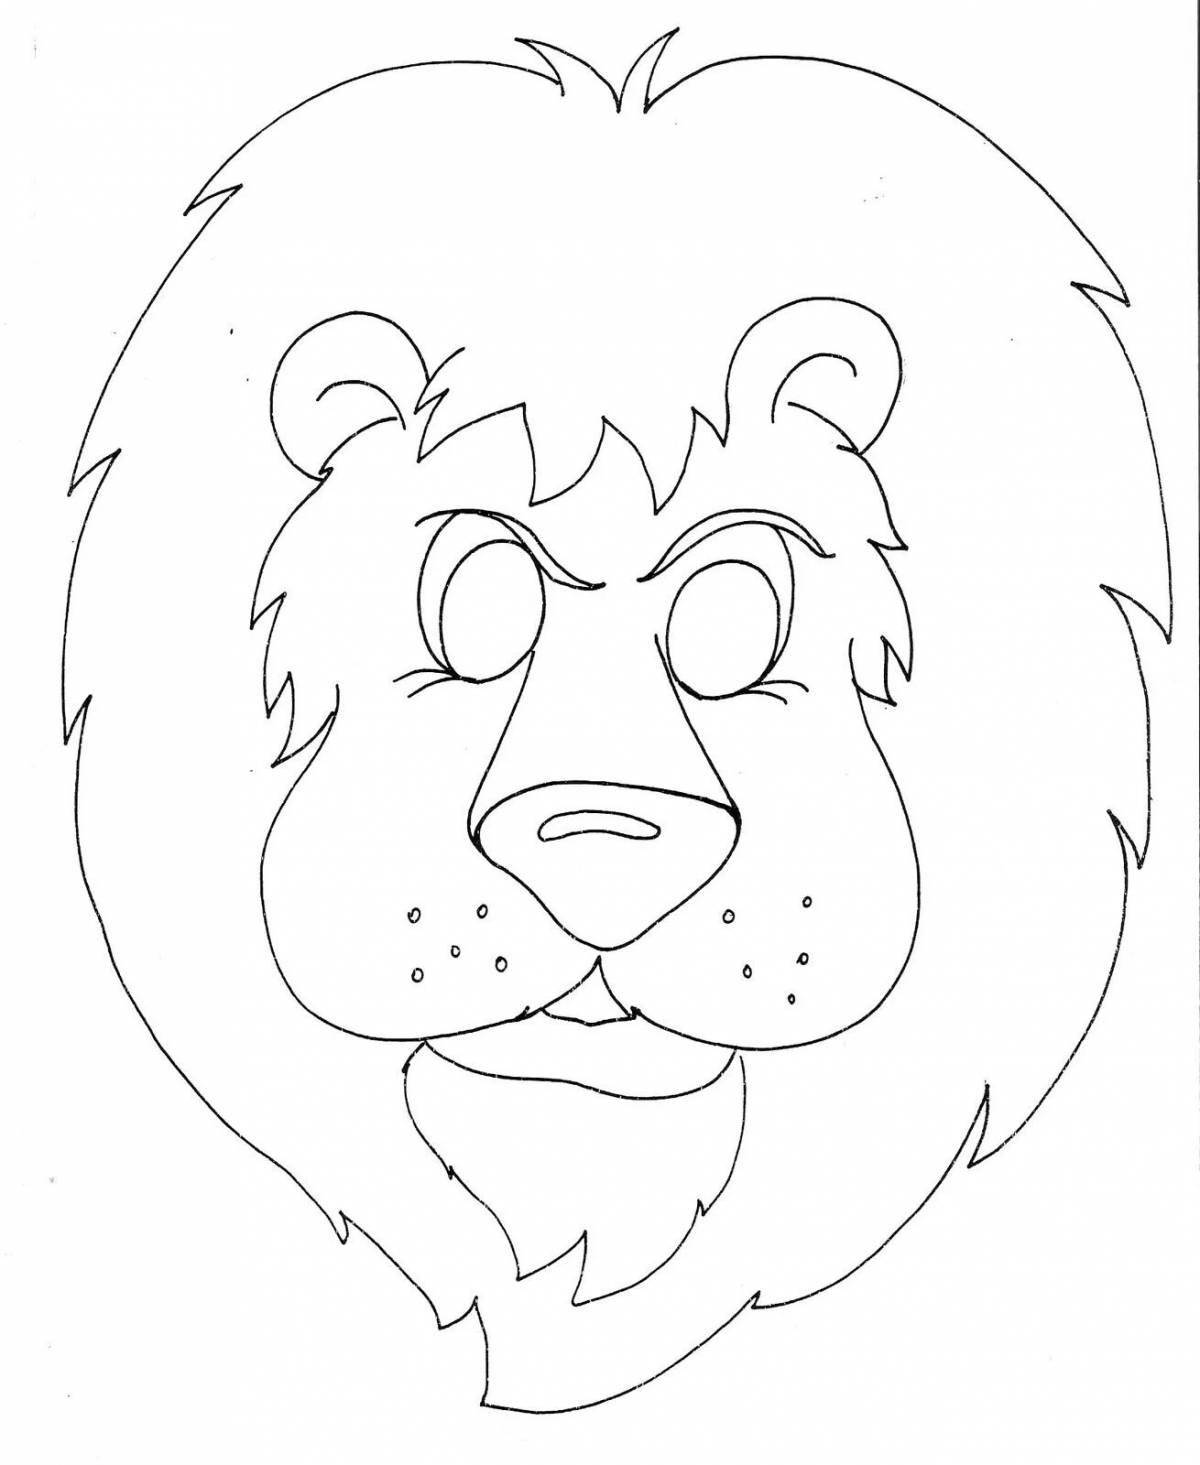 Coloring page of a bright lion